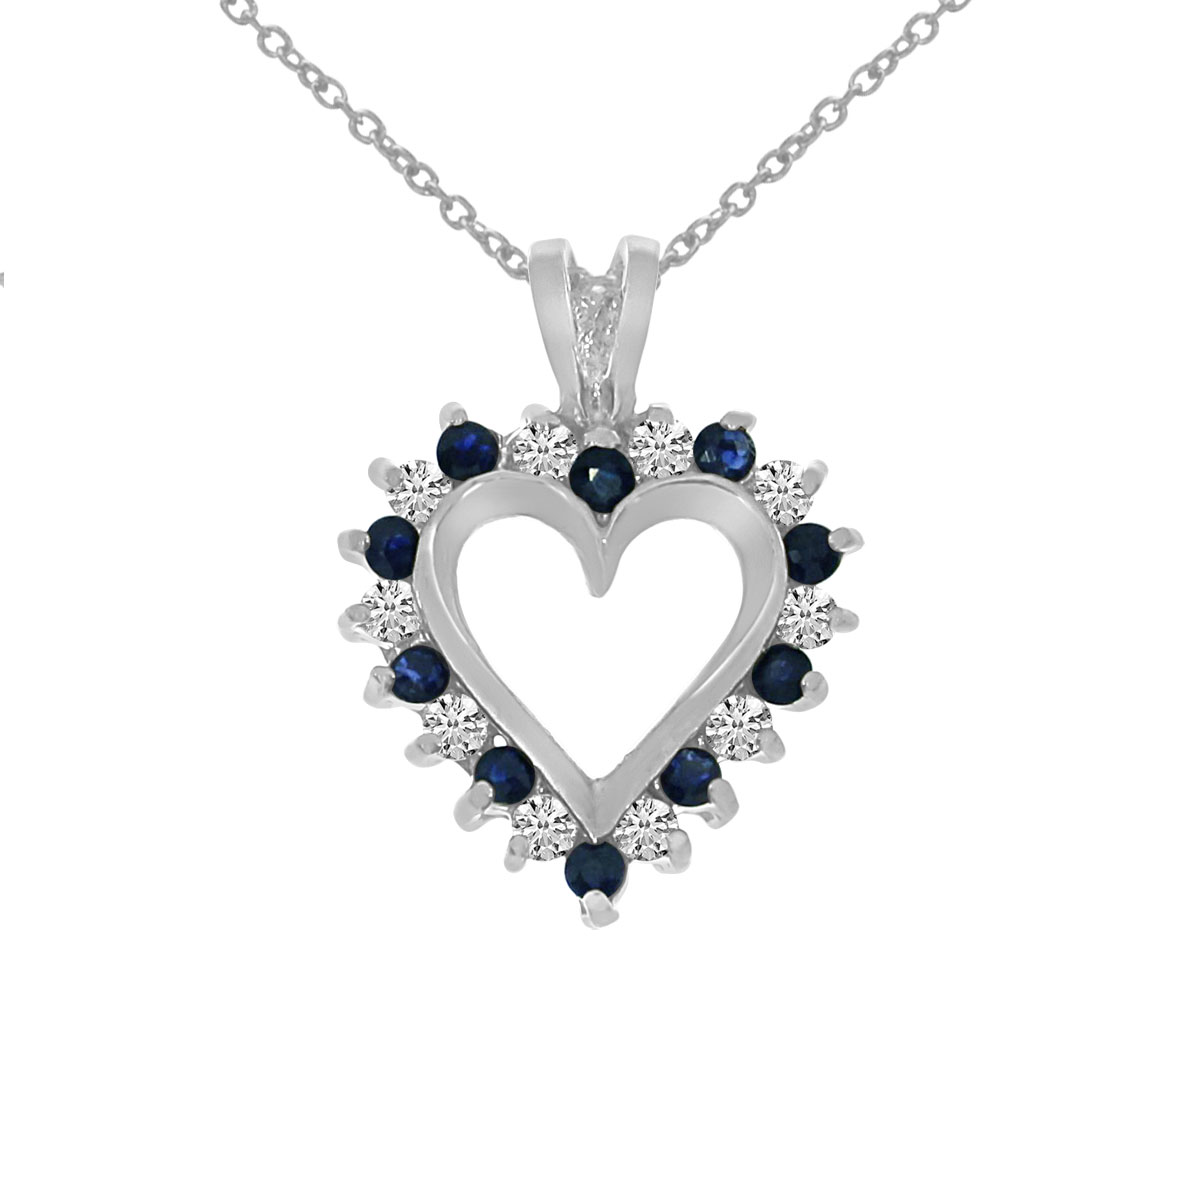 JCX3033: A dazzling 14k white gold heart pendant surrounded by .25 carats of shimmering diamonds and .25 carats of beautiful sapphires.